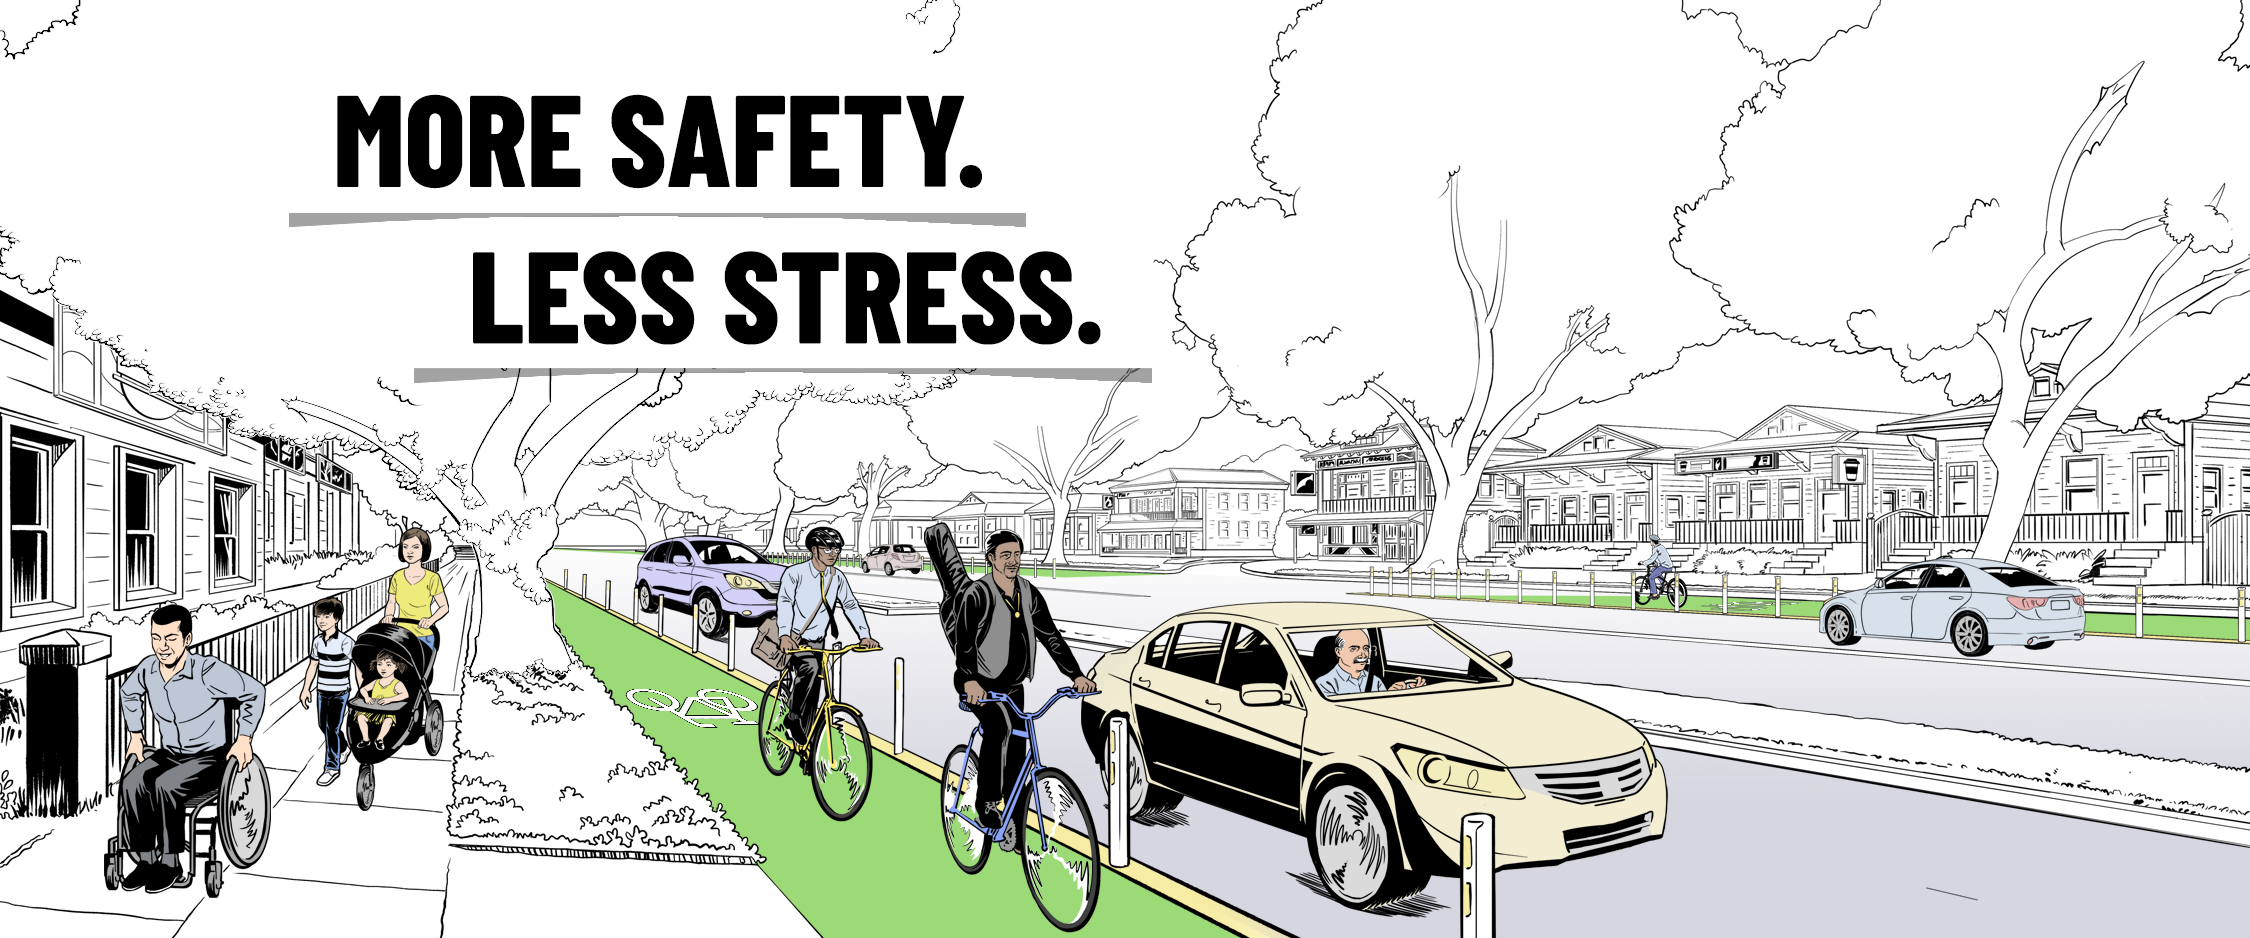 More Safety. Less Stress.